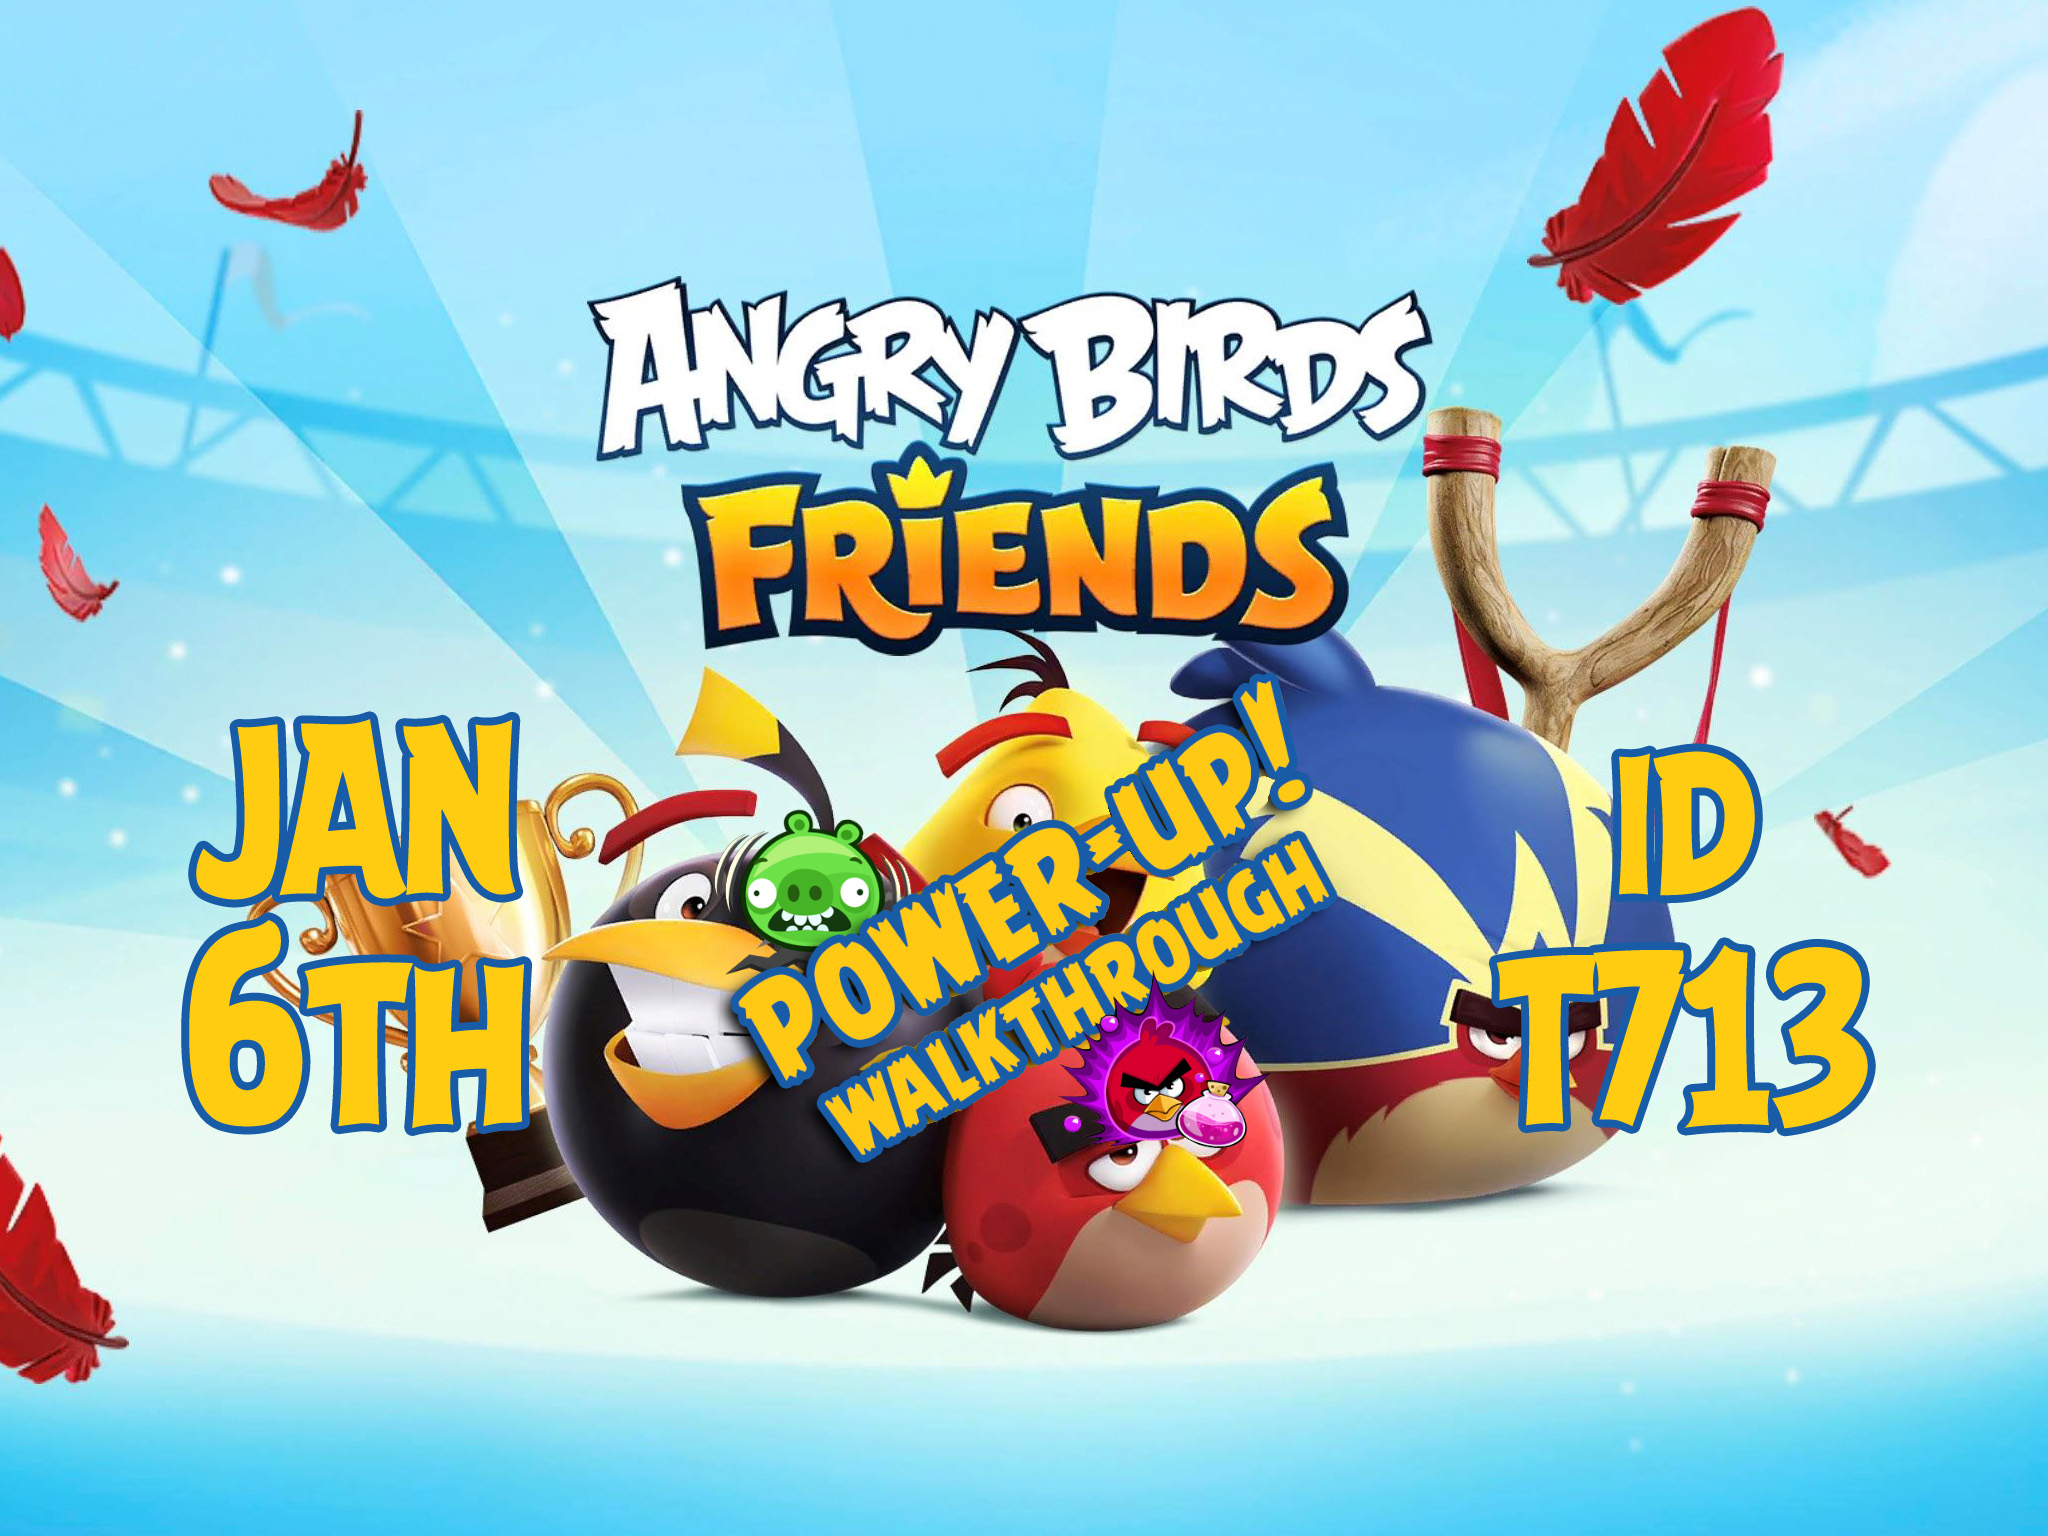 Angry-Birds-Friends-Tournament-T713-Feature-Image-PU